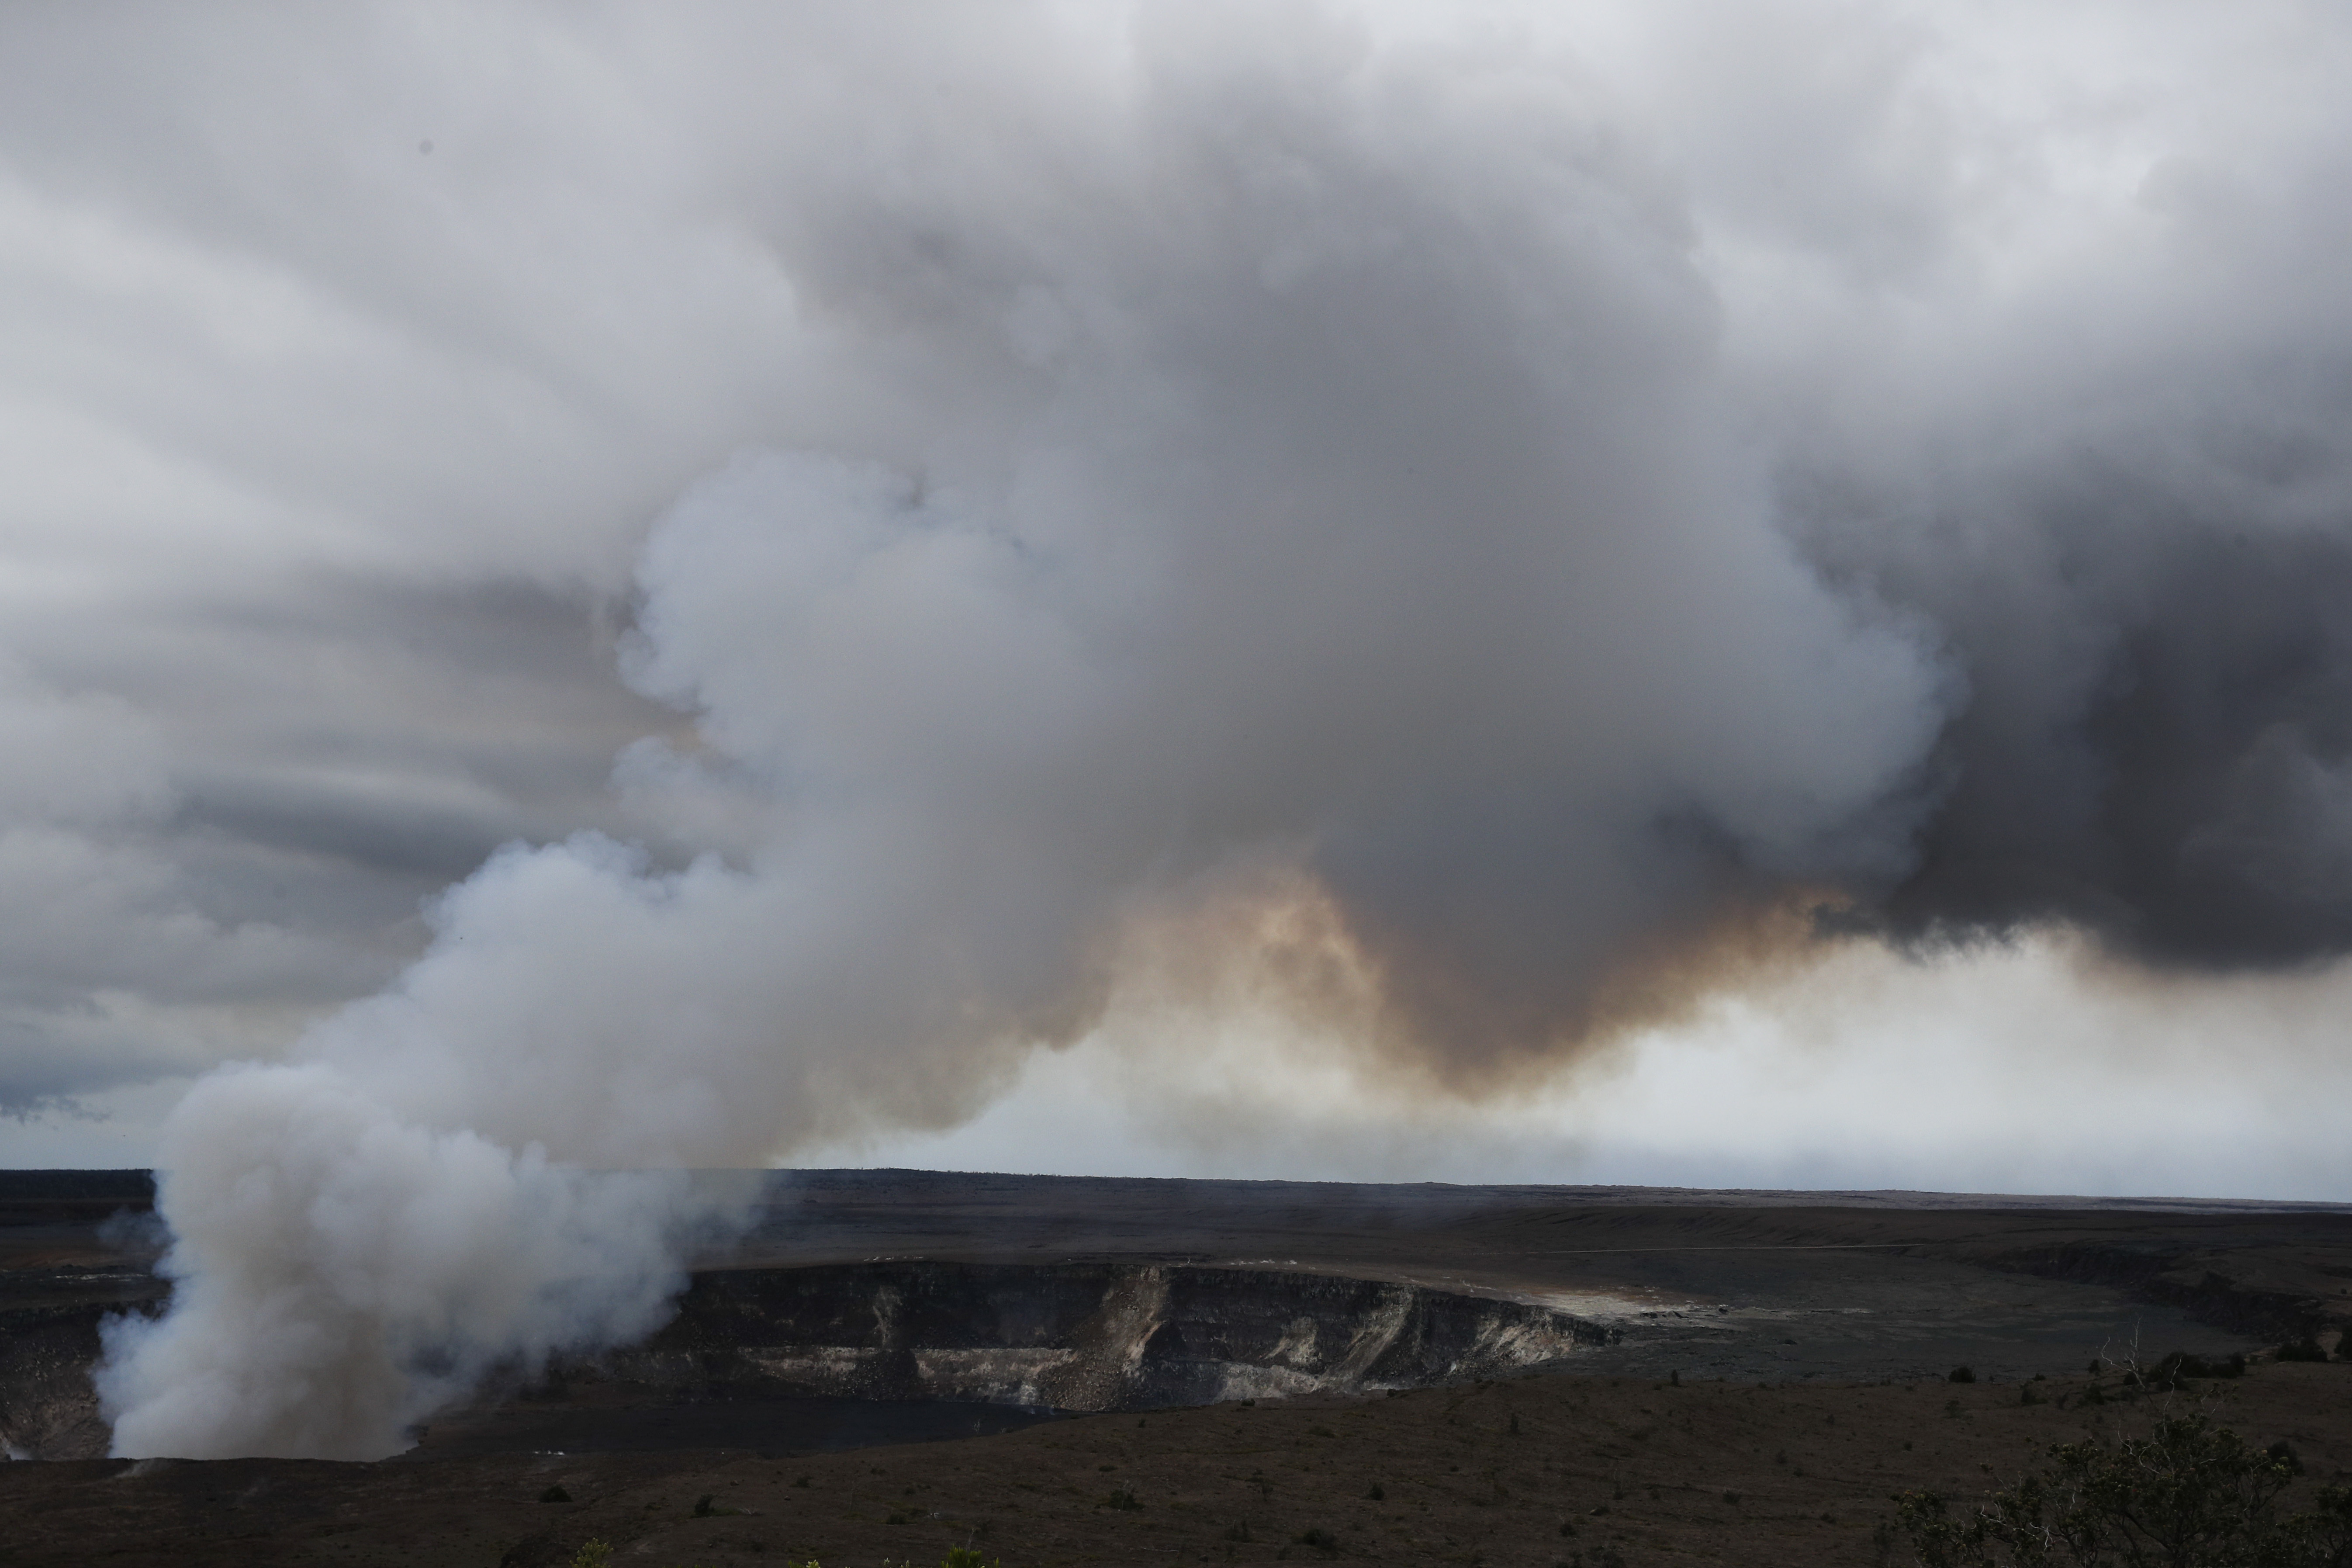 Steam and gas rise from Kilauea's summit crater in Volcanoes National Park, Hawaii, Wednesday, May 9, 2018. Geologists warned Wednesday that Hawaii's Kilauea volcano could erupt explosively and send boulders, rocks and ash into the air around its summit in the coming weeks. (AP Photo/Jae C. Hong)